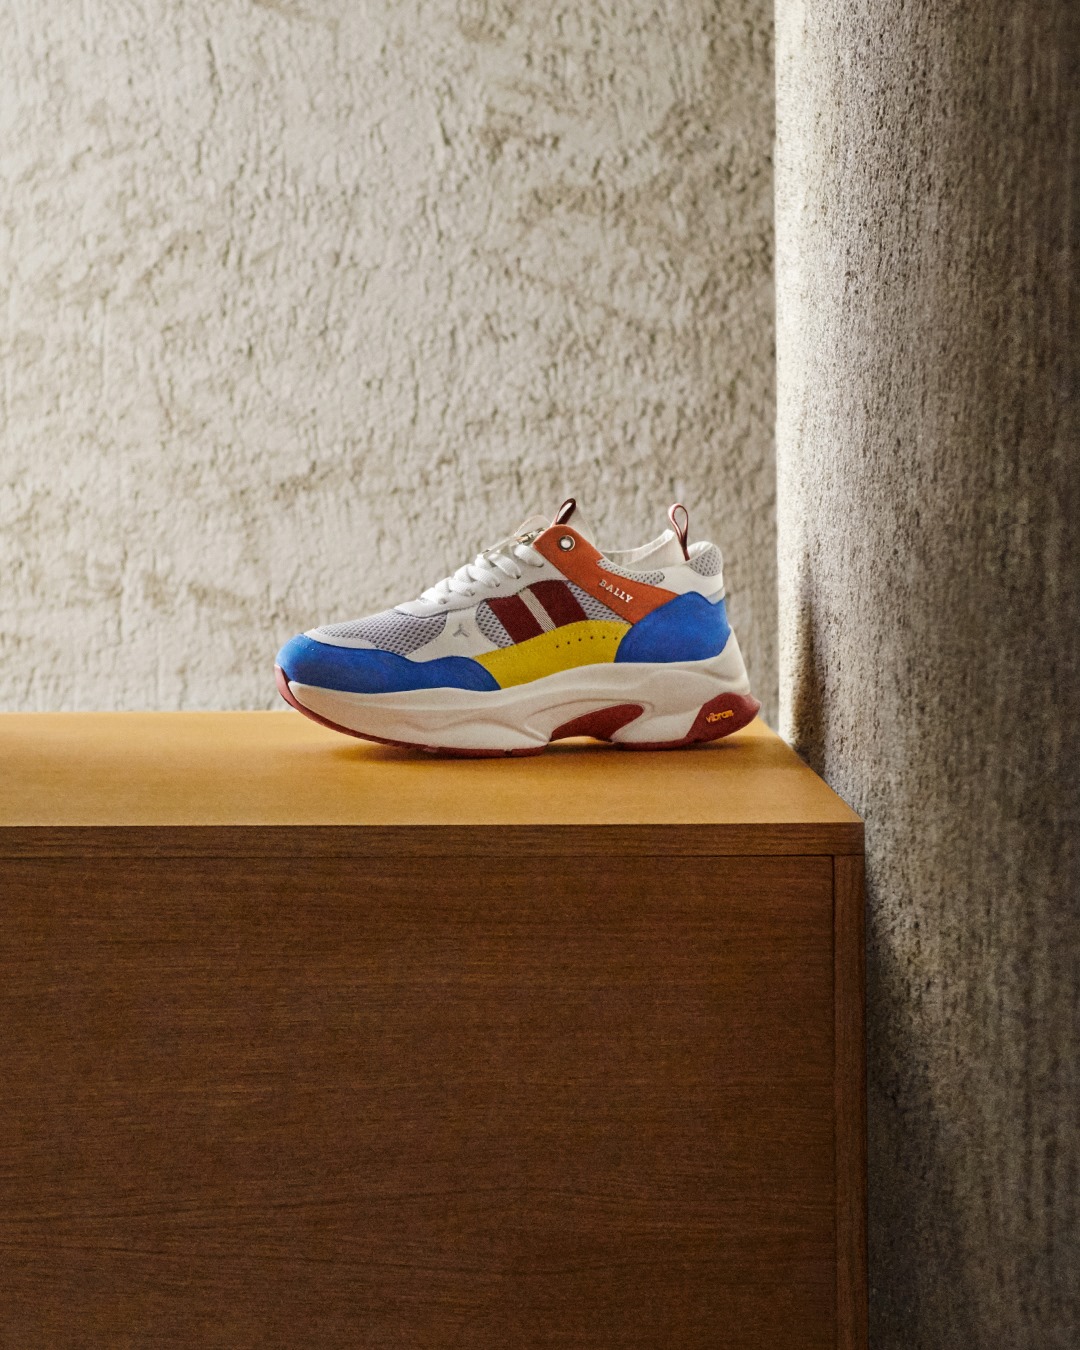 Bold hues mingle with the iconic Bally Stripe on the new Vegas sneaker, which also features a pioneering Vibram sole.